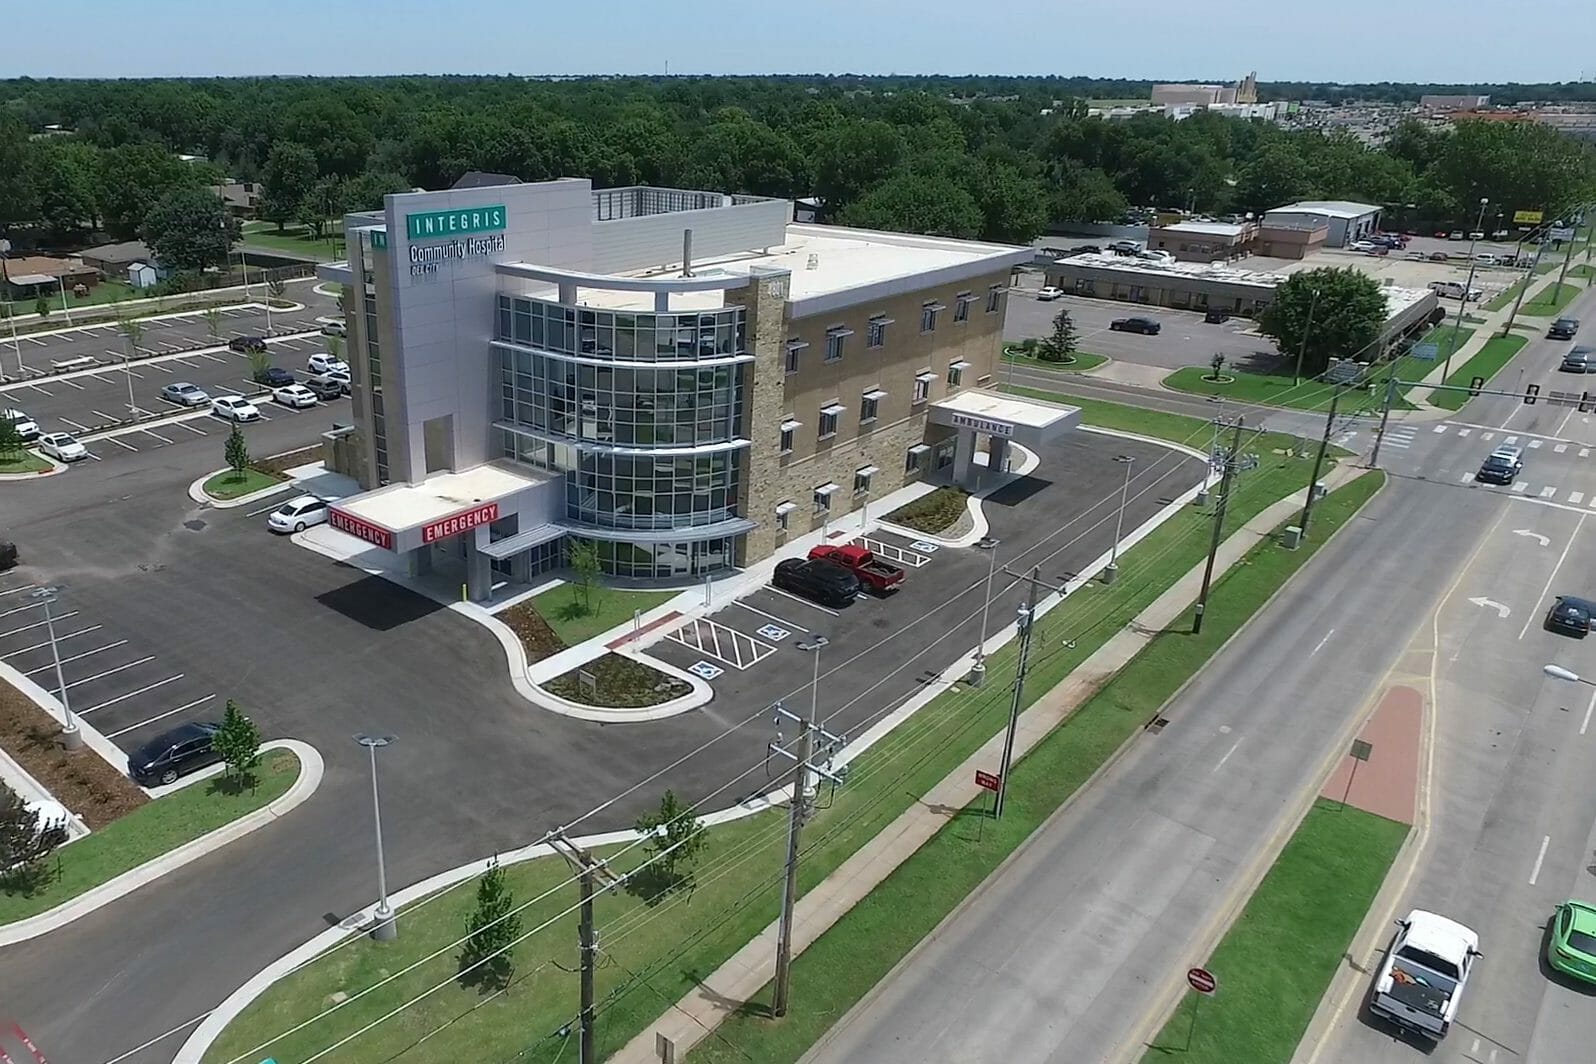 Aerial view of Integris OKC West community hospital with view of the parking lot, nearby main road and residential area behind the hosptial